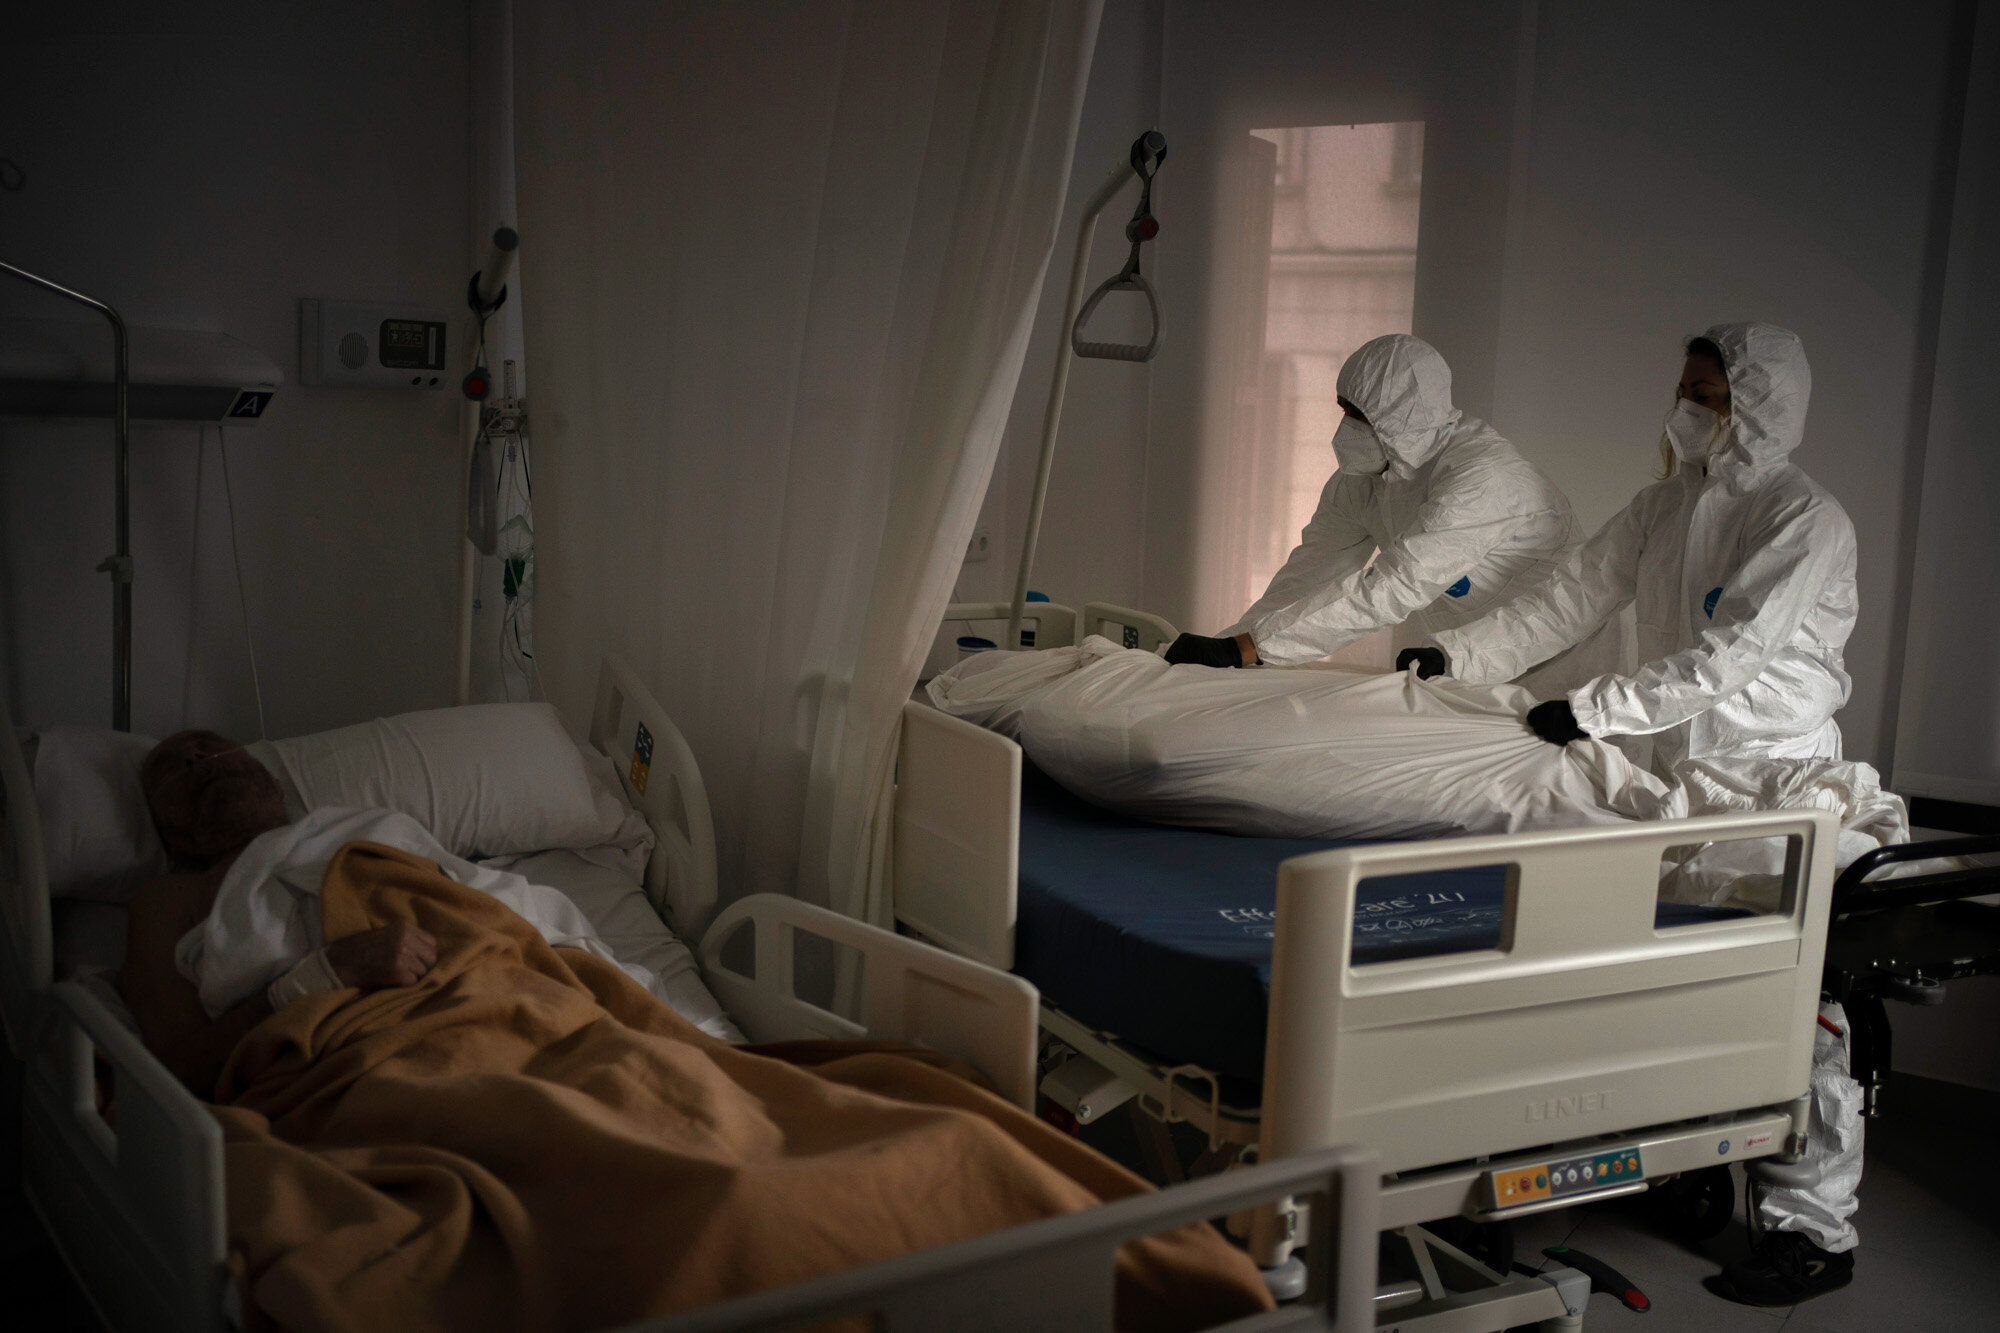  Wearing protective suits to avoid infection, funeral home workers remove the body of an elderly person who died of COVID-19 at a nursing home while another resident sleeps in his bed in Barcelona, Spain, on Nov. 5, 2020. (AP Photo/Emilio Morenatti) 